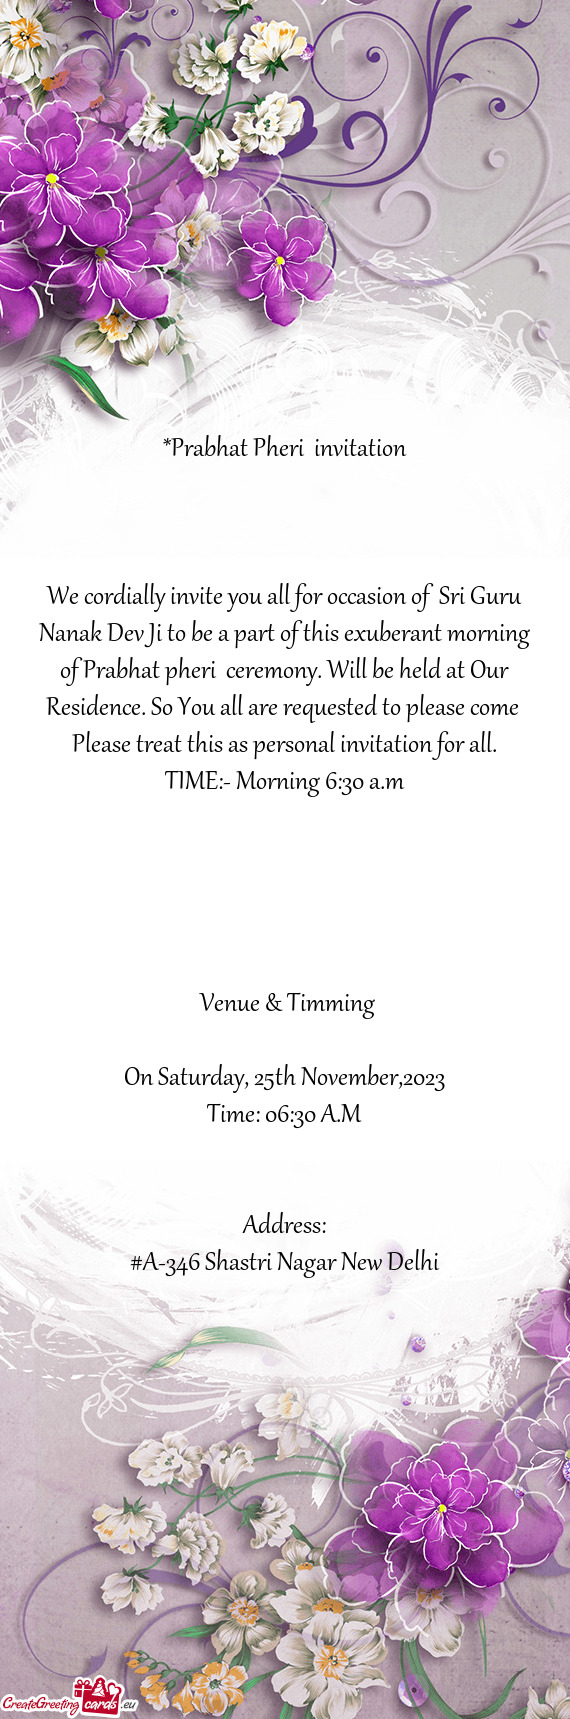 We cordially invite you all for occasion of Sri Guru Nanak Dev Ji to be a part of this exuberant mo